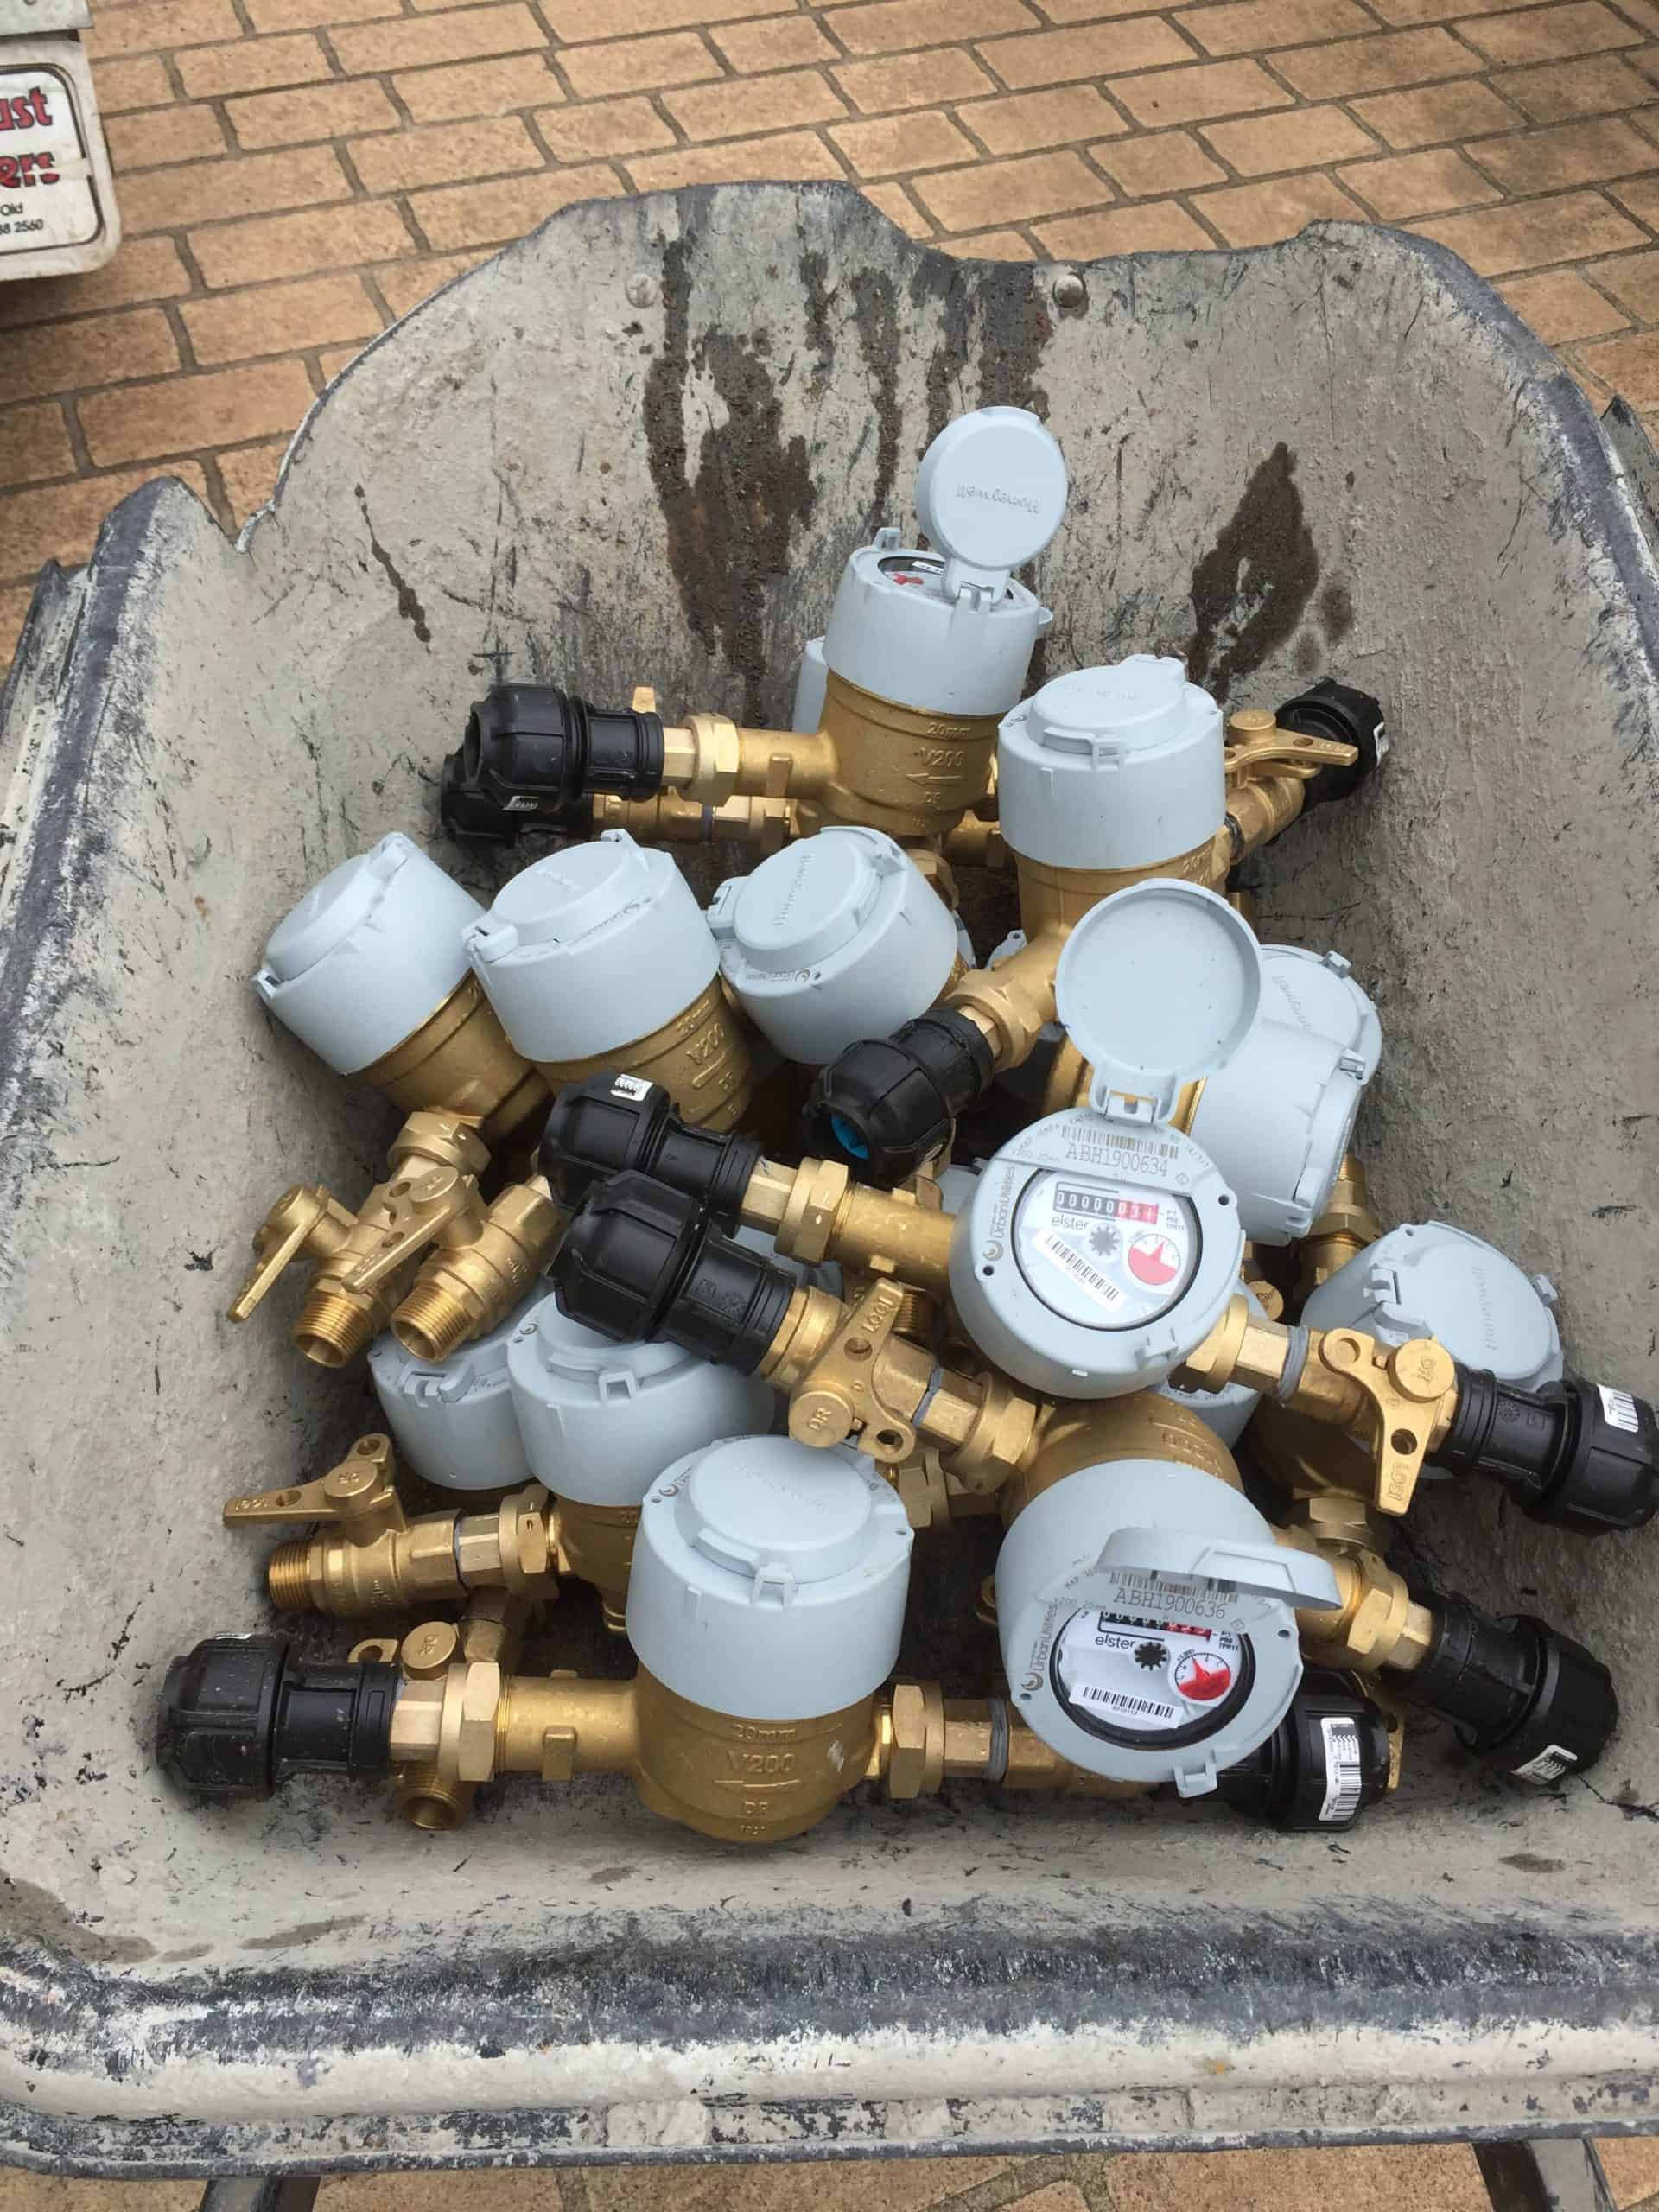 Brand new water metres for upgrade in Fitzgibbon